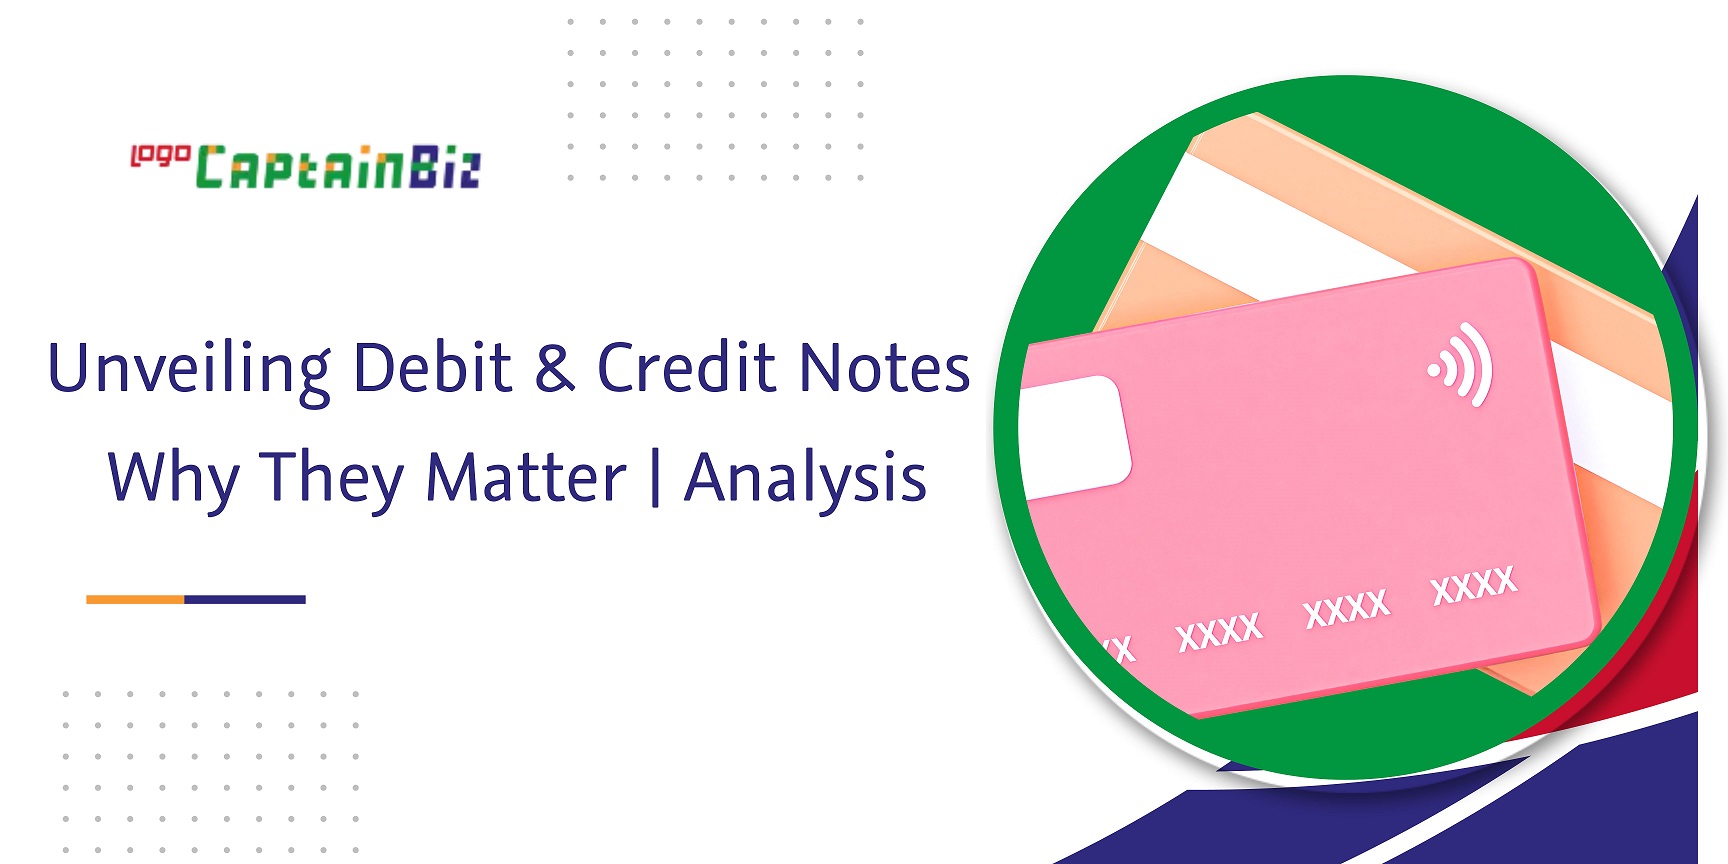 CaptainBiz: unveiling-debit-credit-notes-why-they-matter-analysis